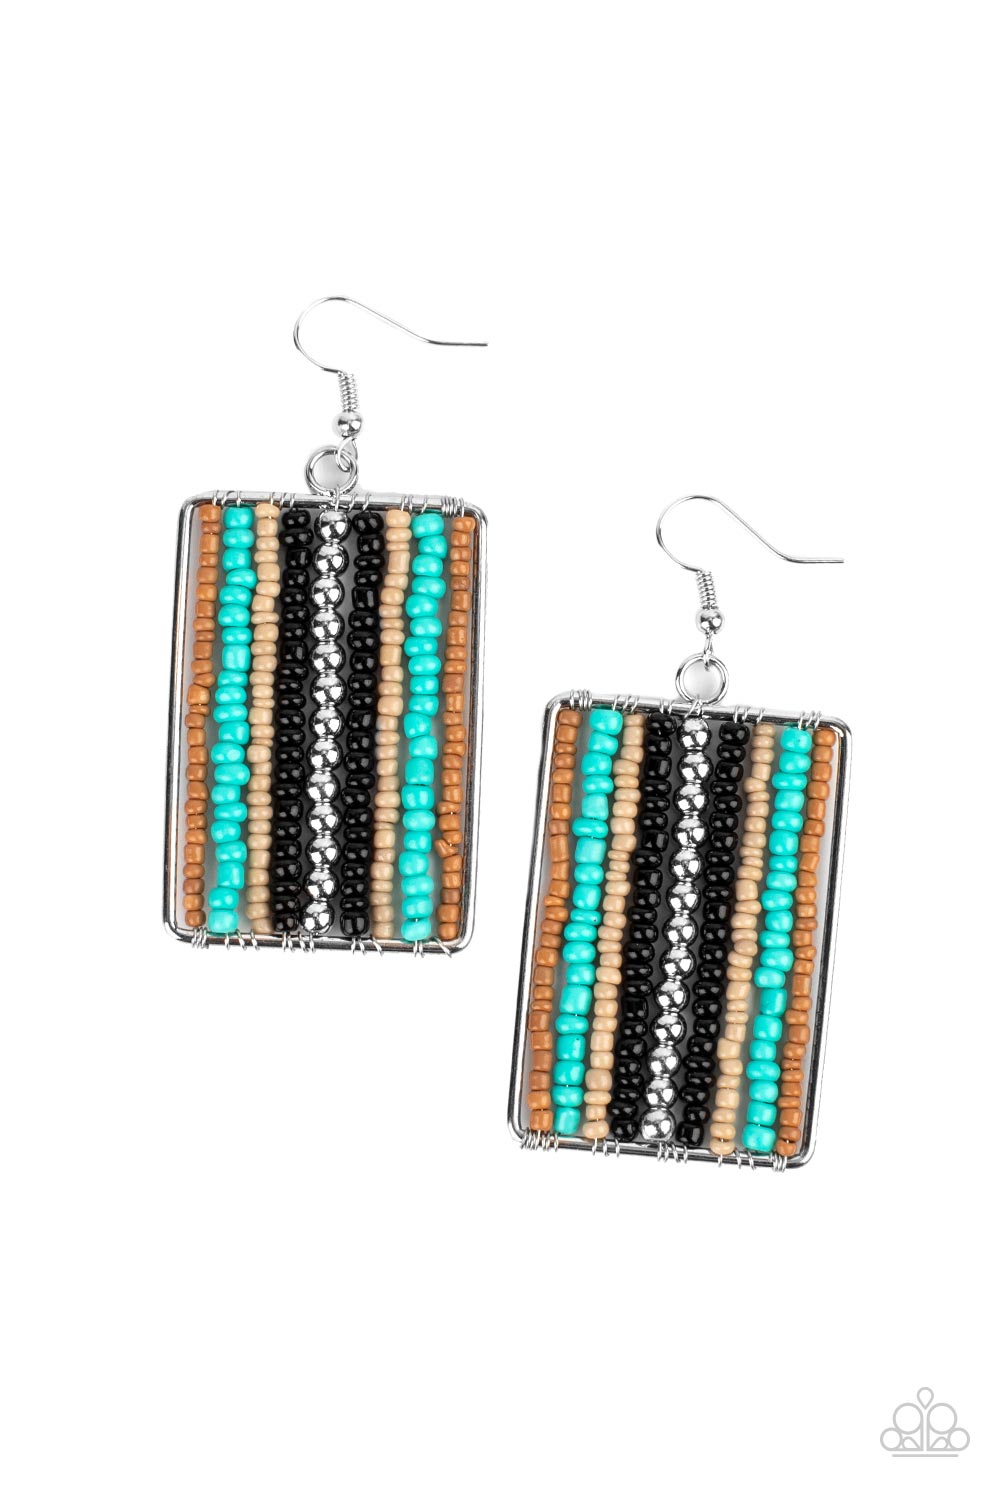 Paparazzi Jewelry & Accessories - Beadwork Wonder - Black Earrings. Bling By Titia Boutique